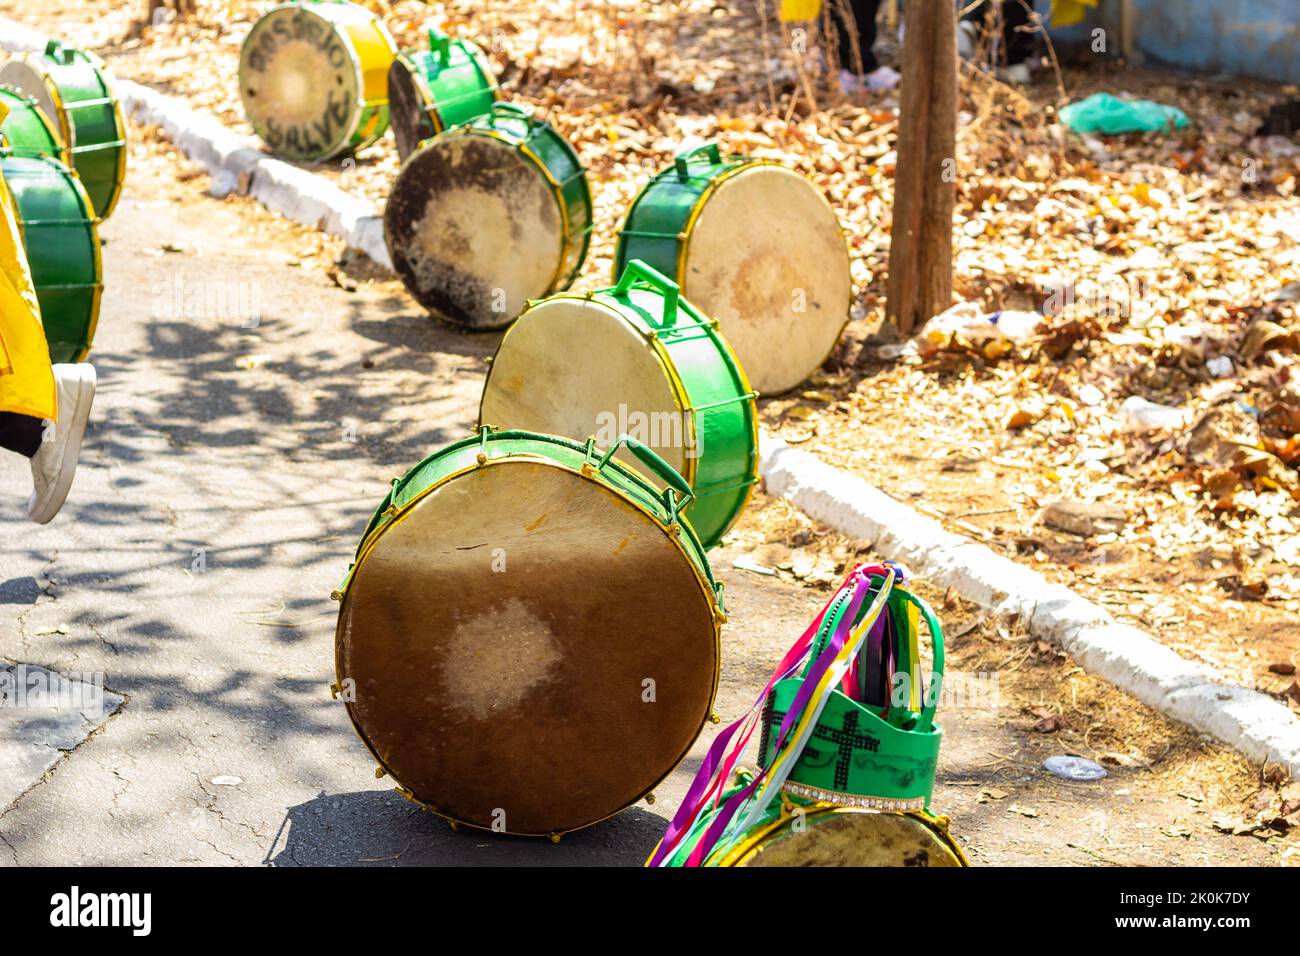 Goiânia, Goias, Brazil – September 11, 2022: Detail of some green drums kept on the floor, used during the Congadas, an Afro-Brazilian cultural Stock Photo